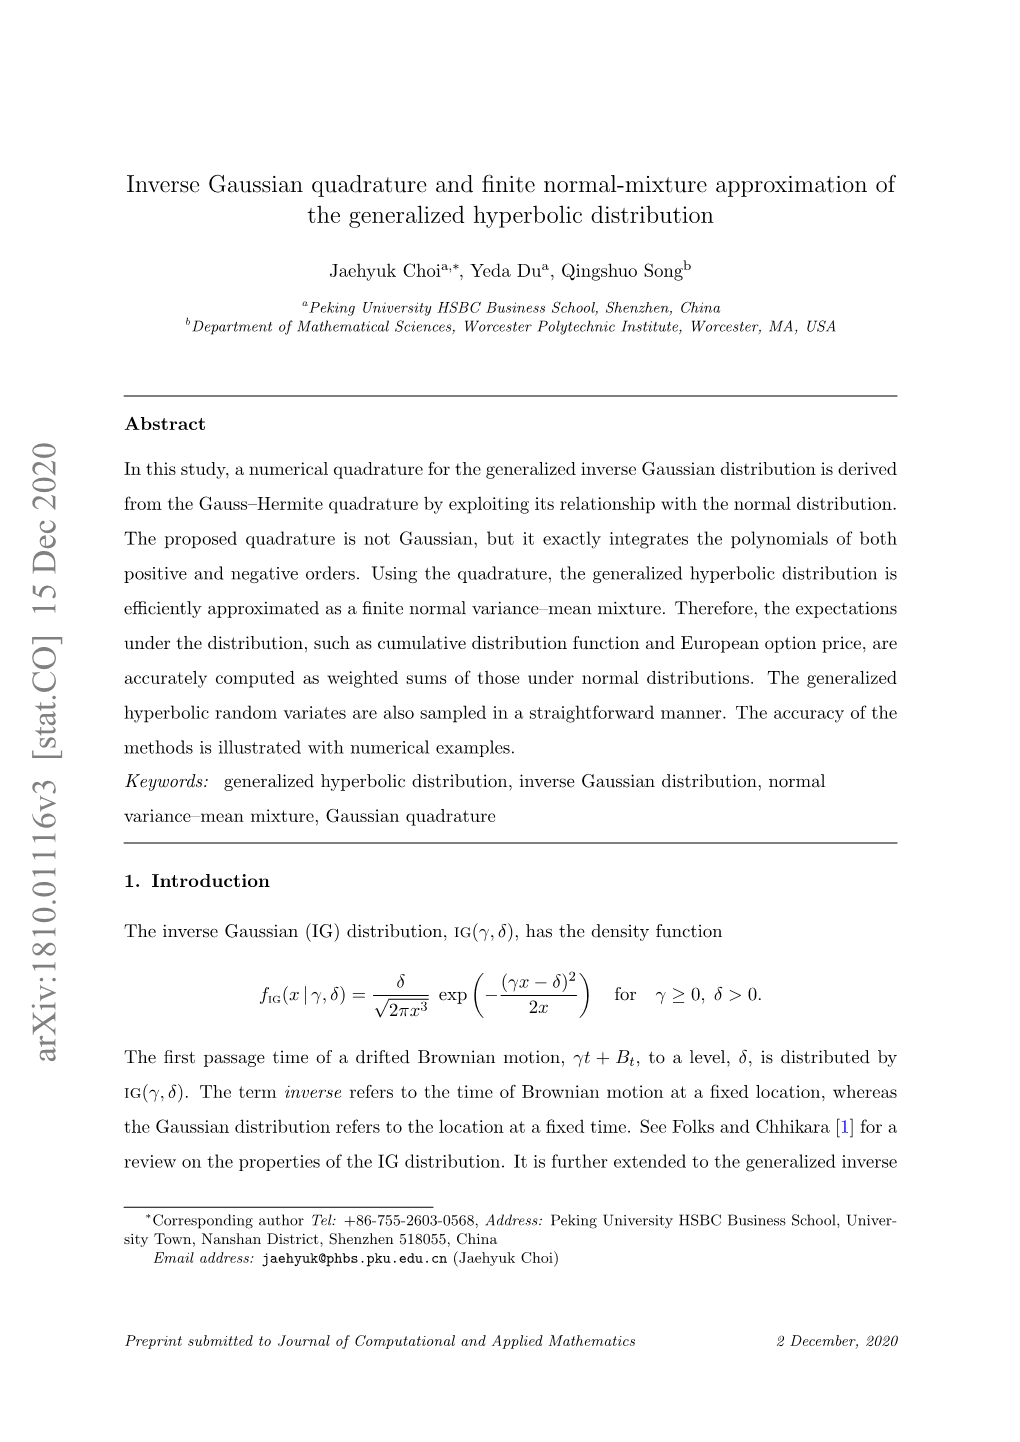 Inverse Gaussian Quadrature and Finite Normal-Mixture Approximation of the Generalized Hyperbolic Distribution